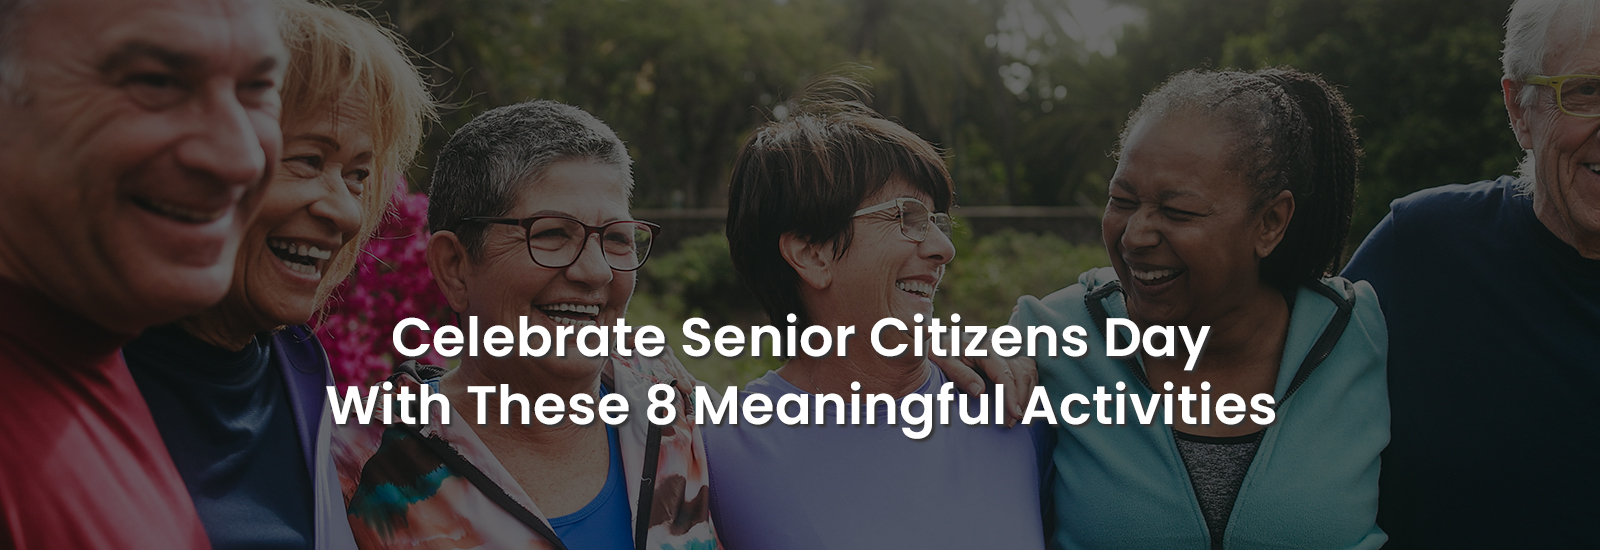 Celebrate Senior Citizens Day with These 8 Meaningful Activities | Banner Image